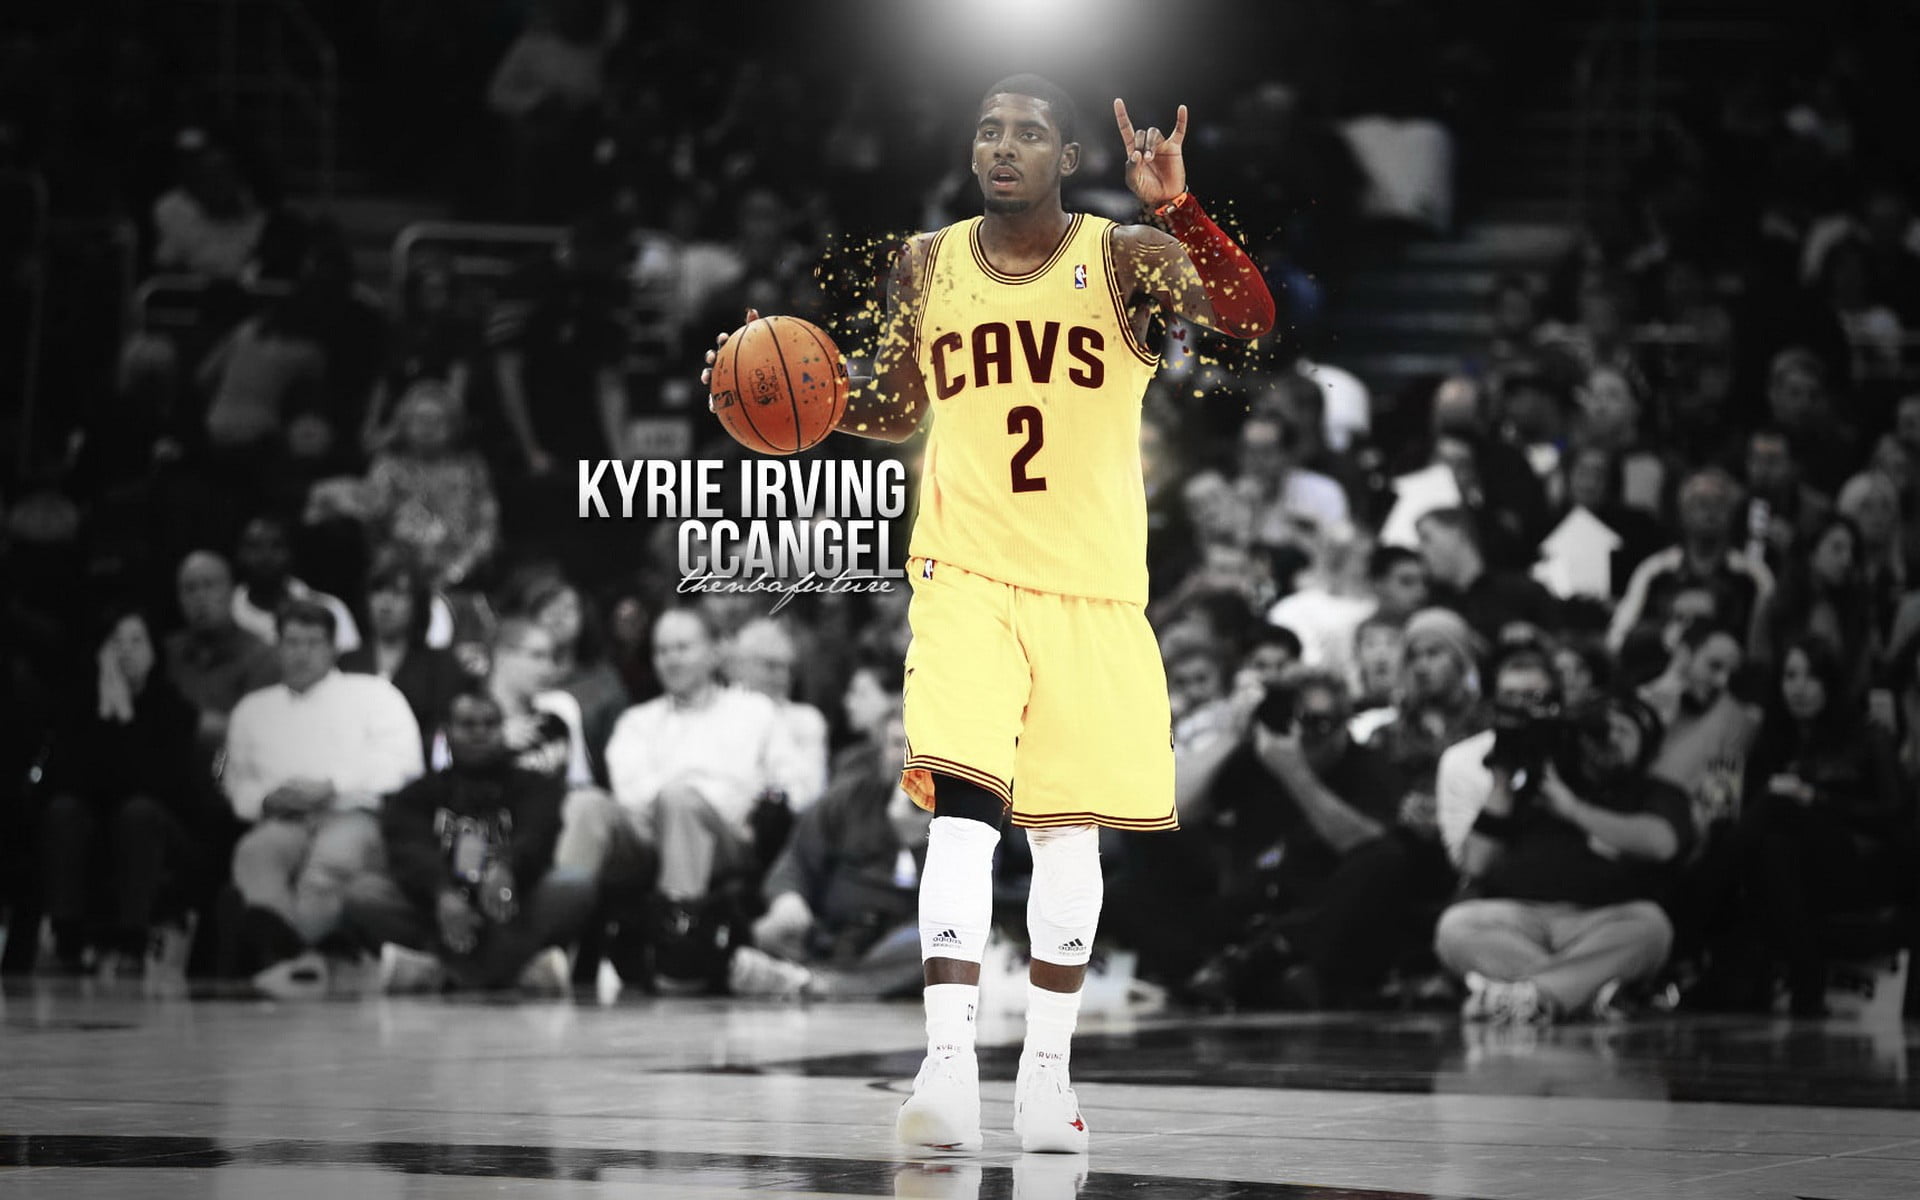 Kyrie Irving poster, basketball, selective coloring, sport , men